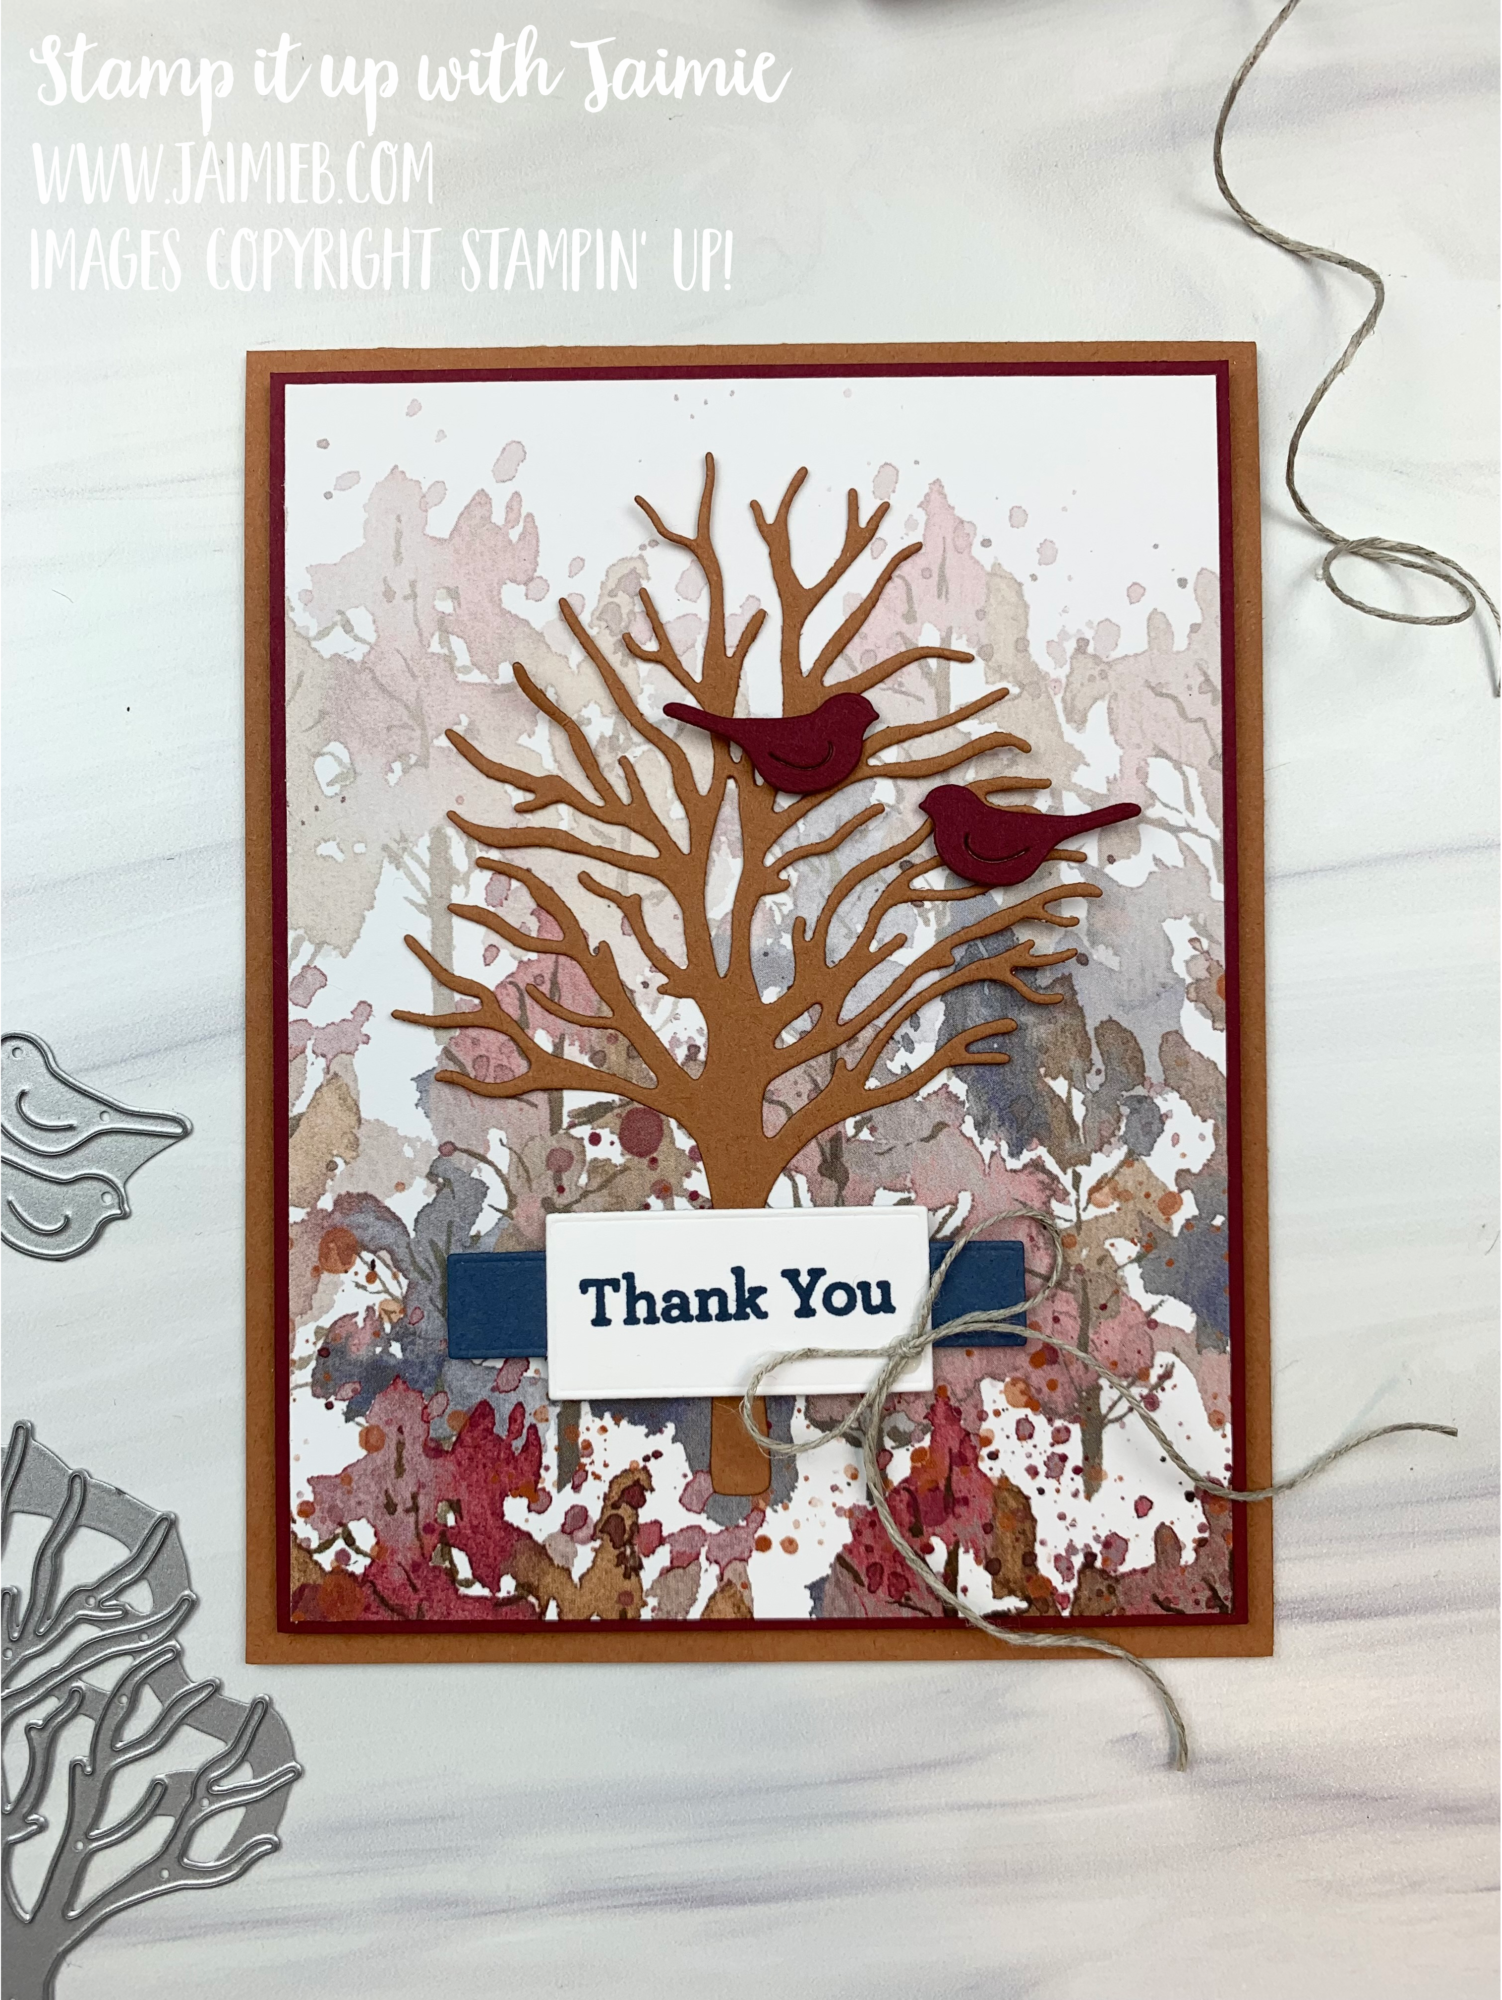 Stampin’ Up! Beauty of Friendship Thank You Card